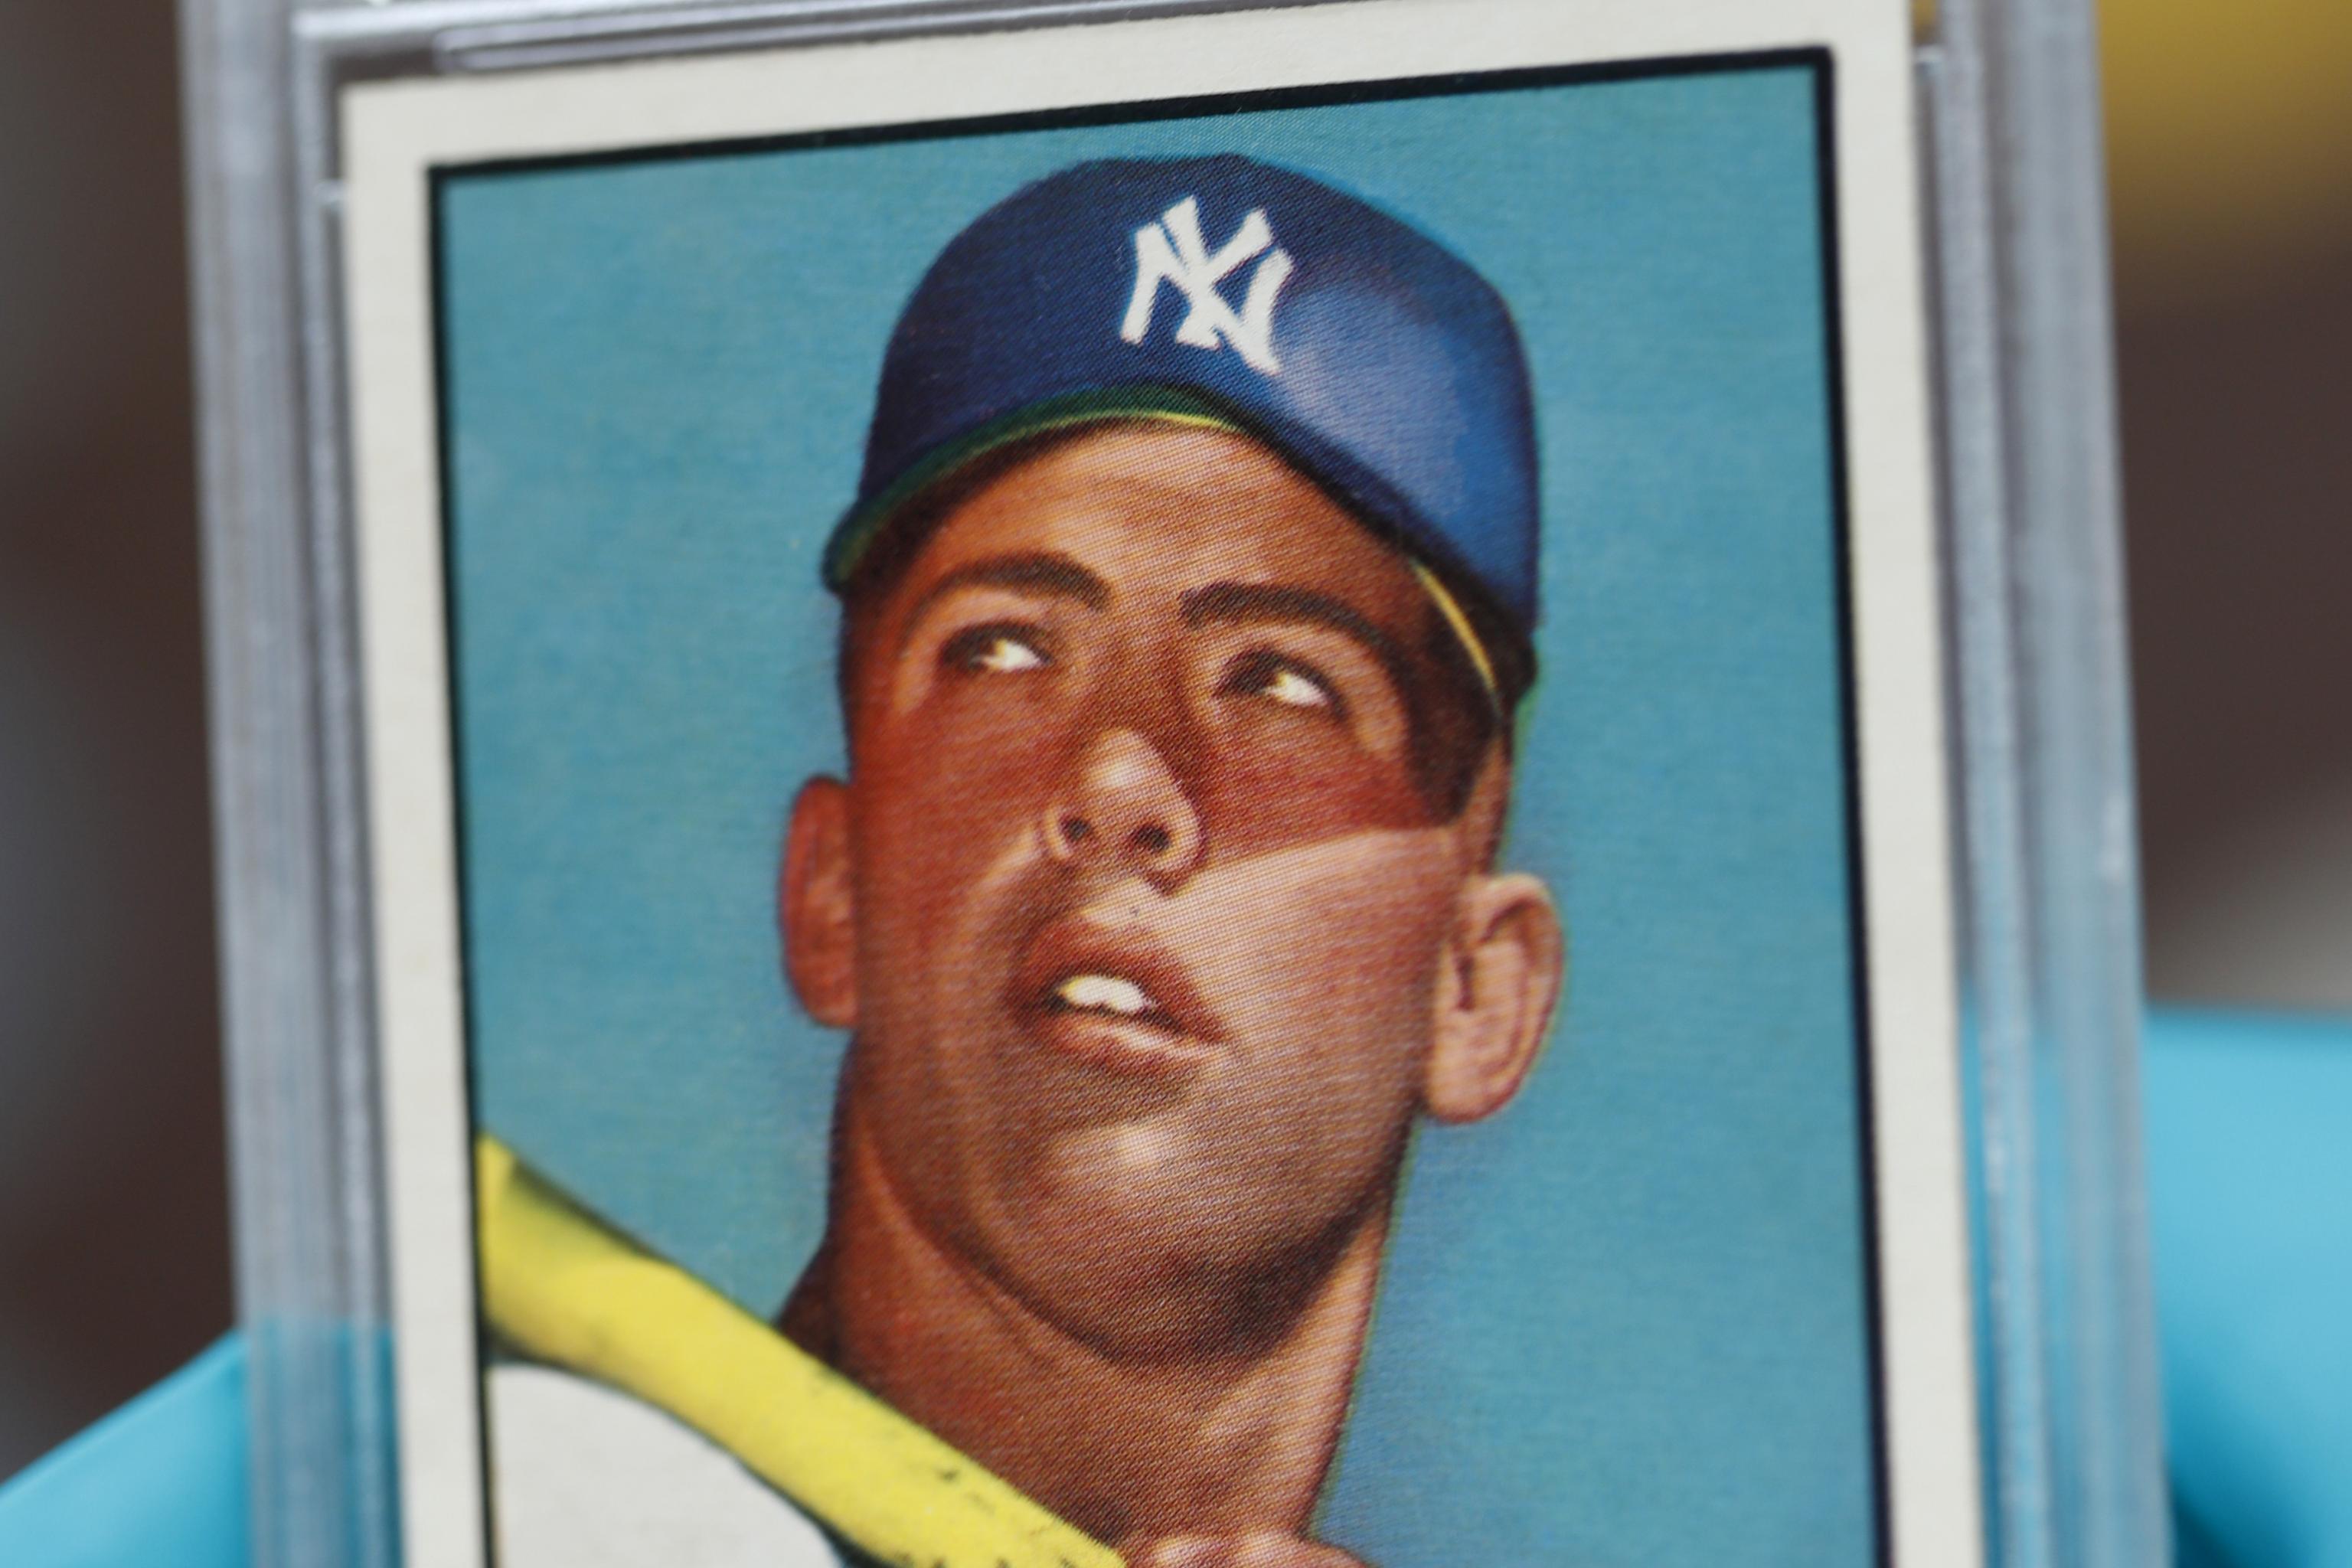 Mickey Mantle Shatters Card Record in $5.2 Million Deal